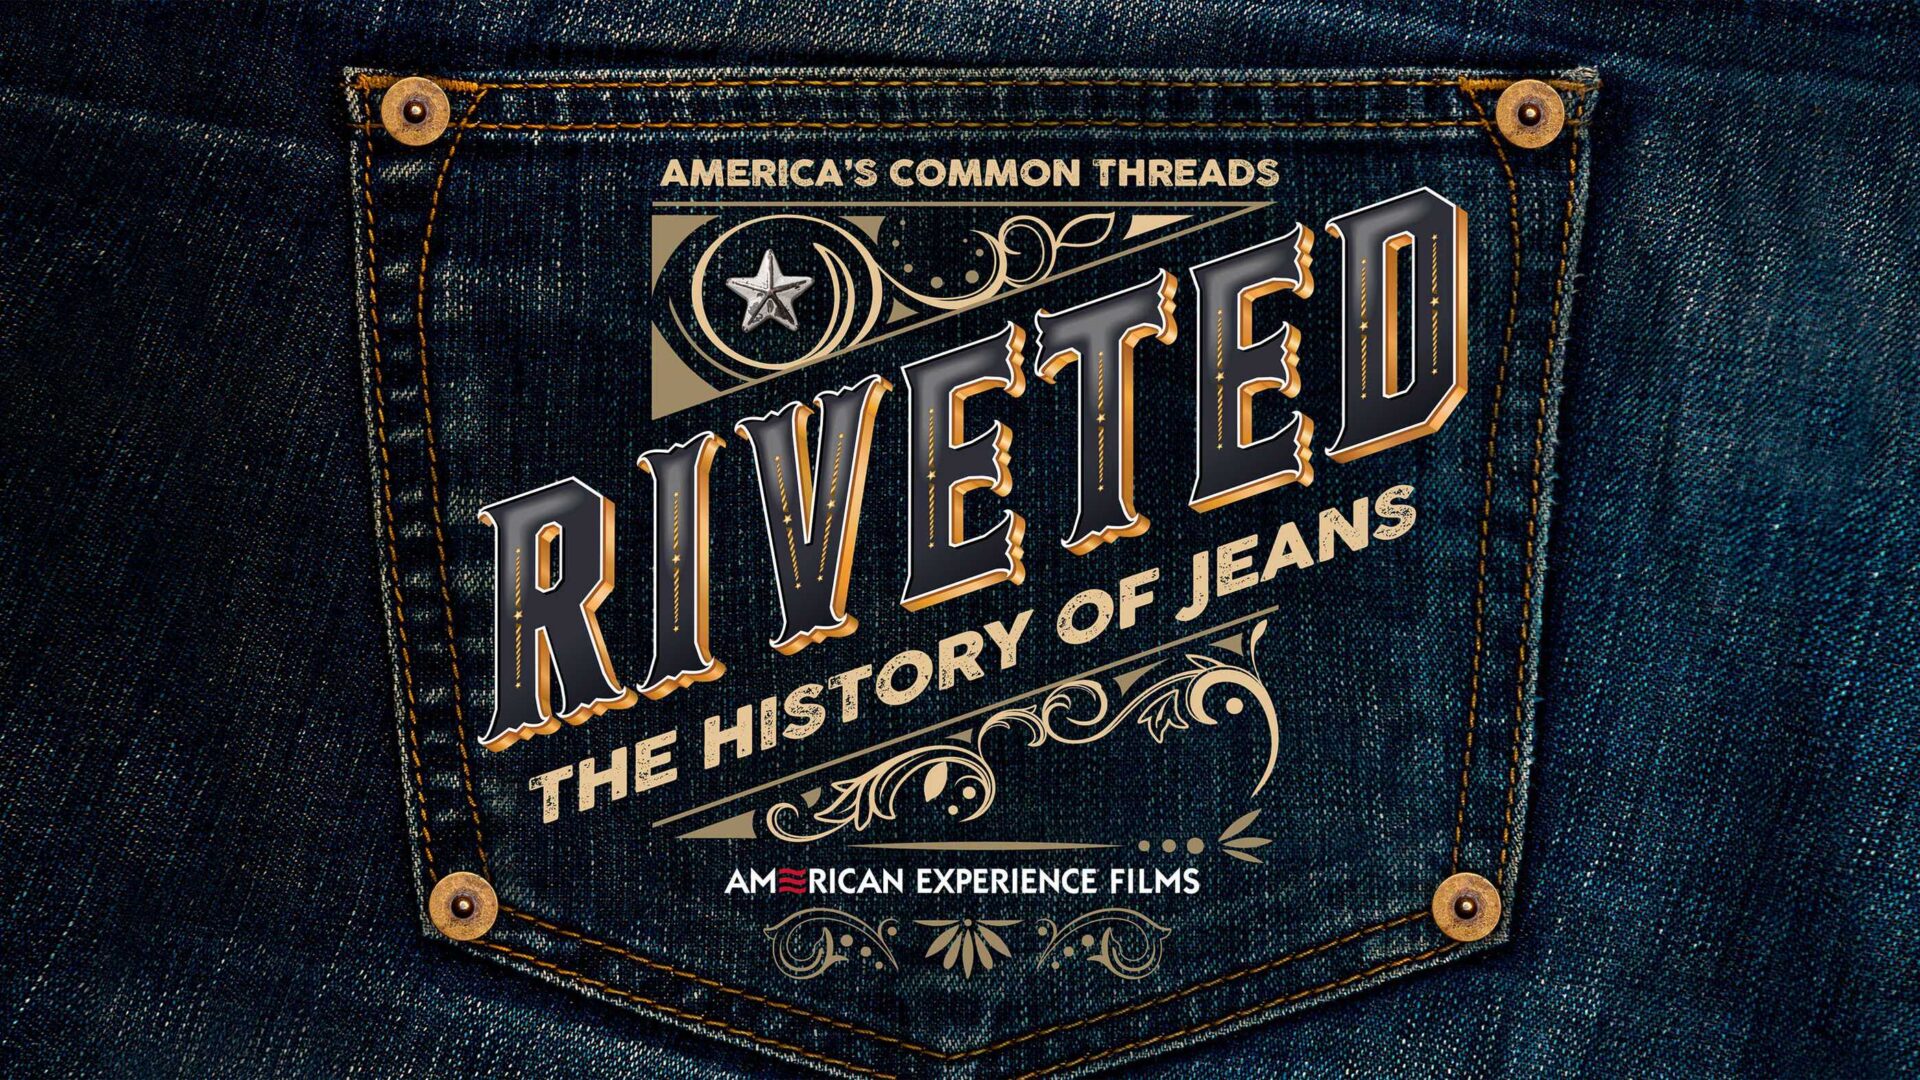 Riveted: The History of Jeans – An American Experience Encore